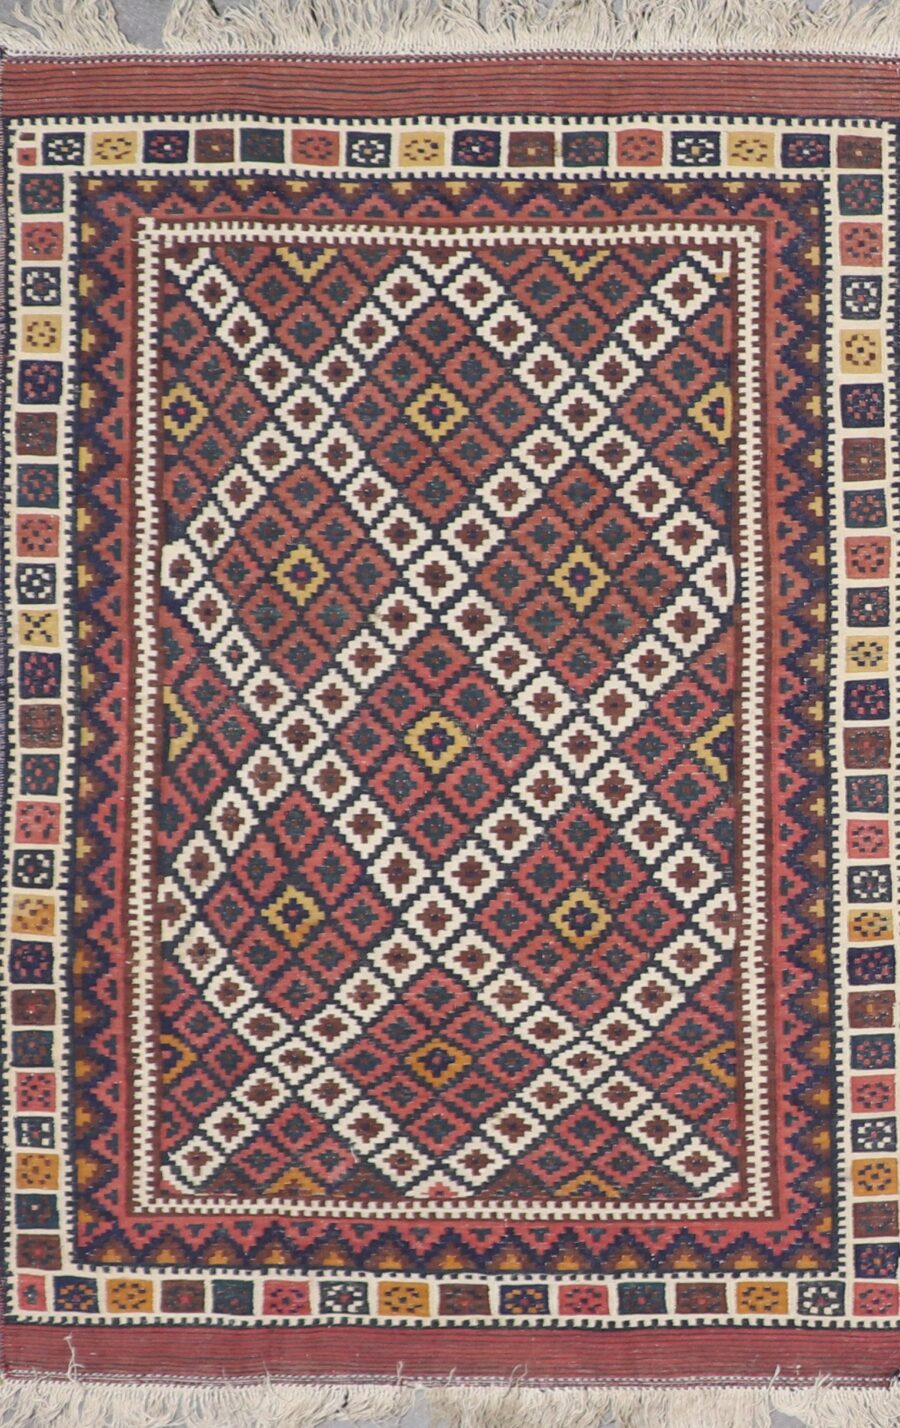 4’5”x6’2” Persian Kilim Brown Wool Hand-Knotted Rug - Direct Rug Import | Rugs in Chicago, Indiana,South Bend,Granger